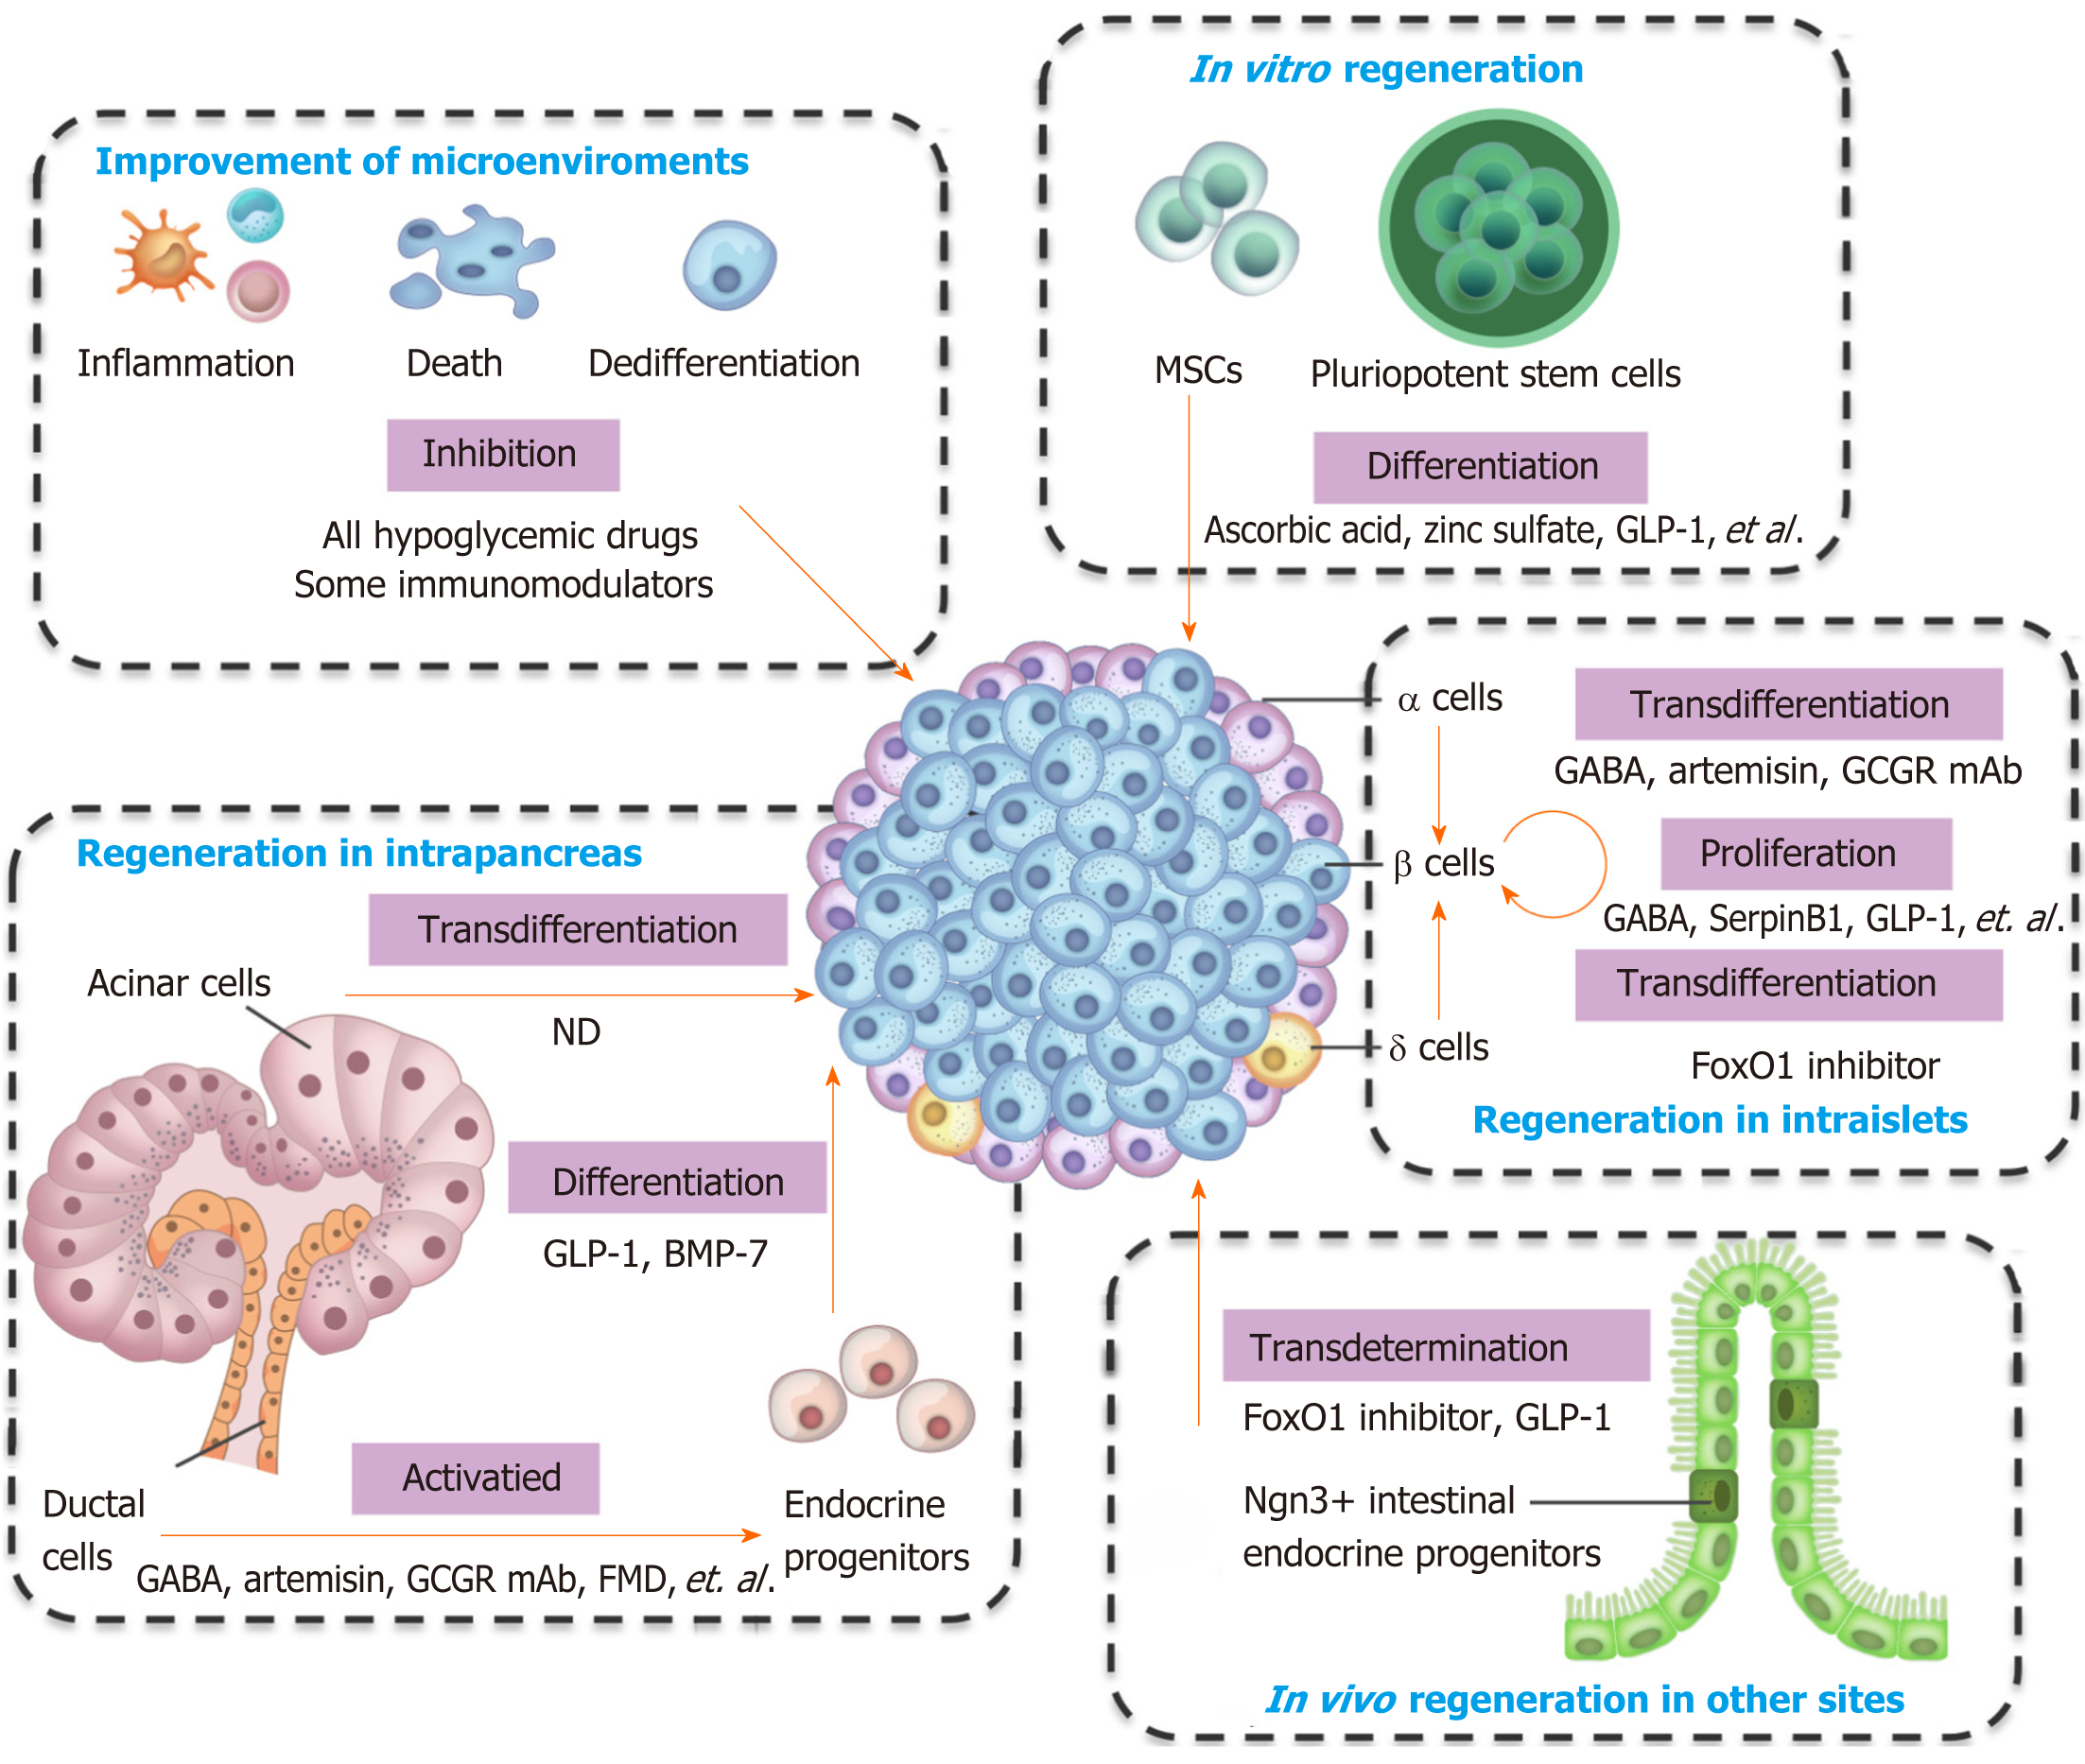 Pancreatic β cell regeneration induced by clinical and preclinical agents